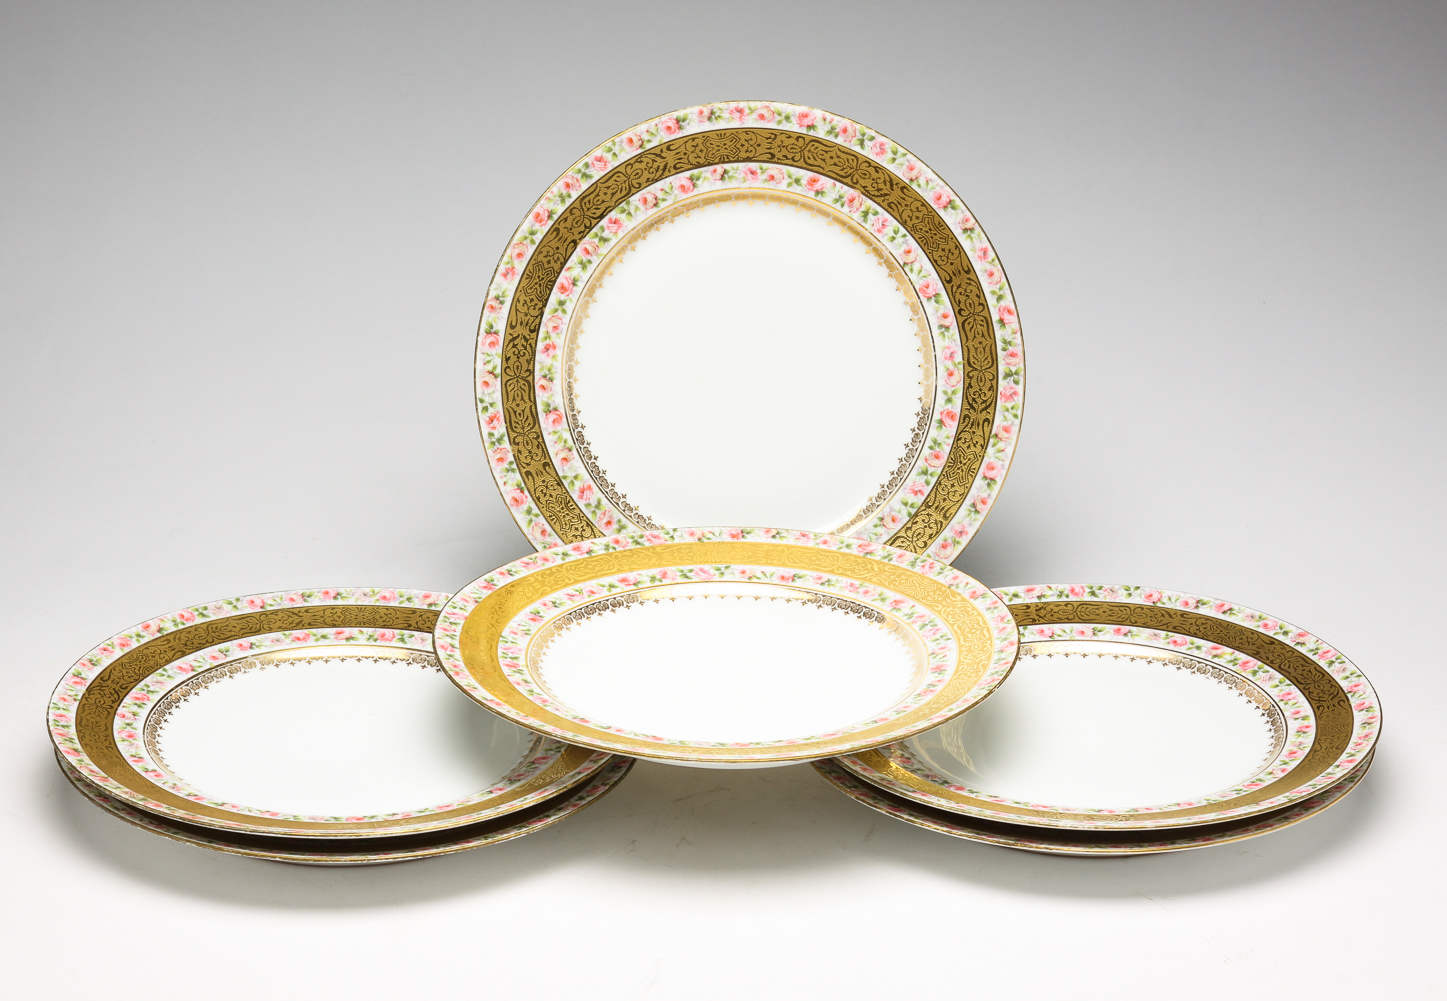 SIX FRENCH PLATES. Early 20th century,